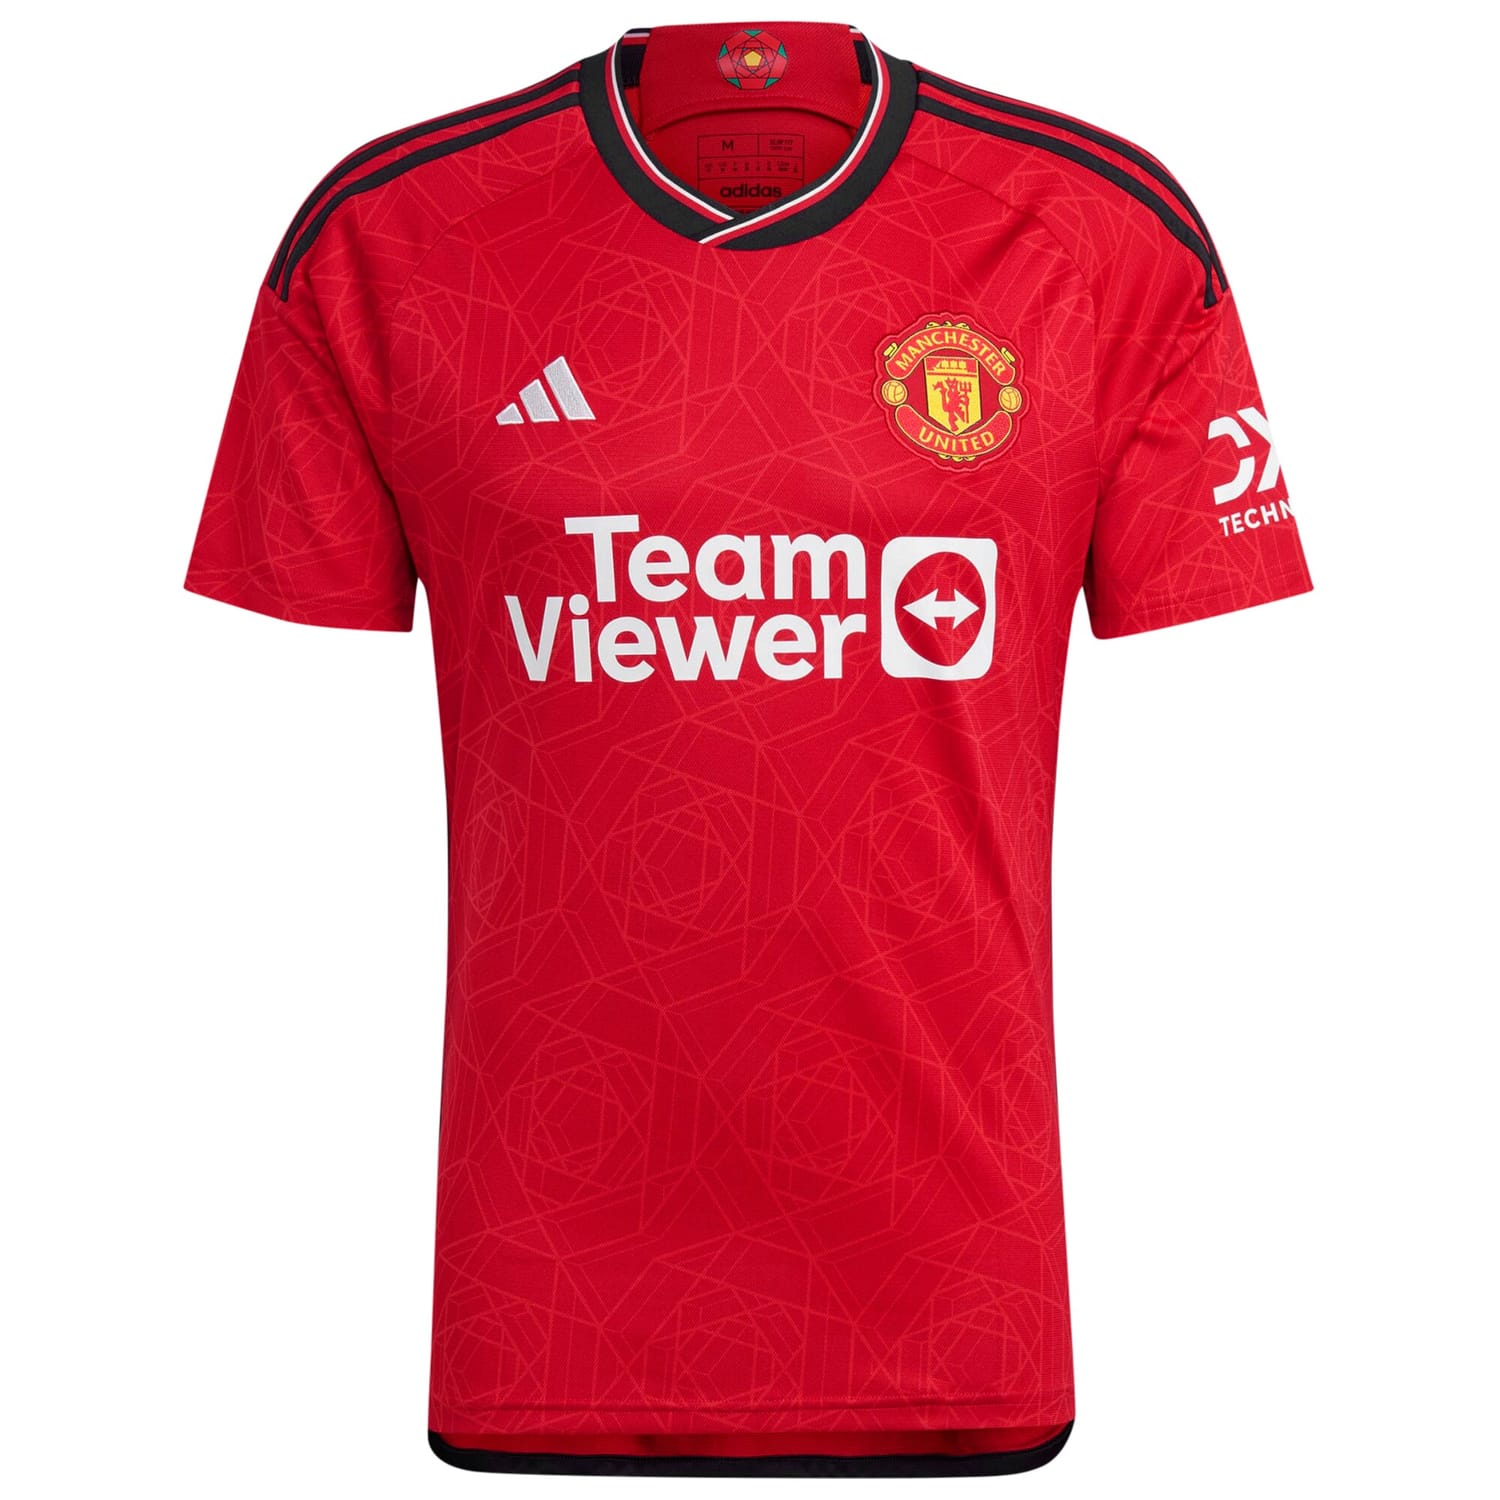 Premier League Manchester United Home Cup Jersey Shirt 2023-24 player Gabrielle George printing for Men